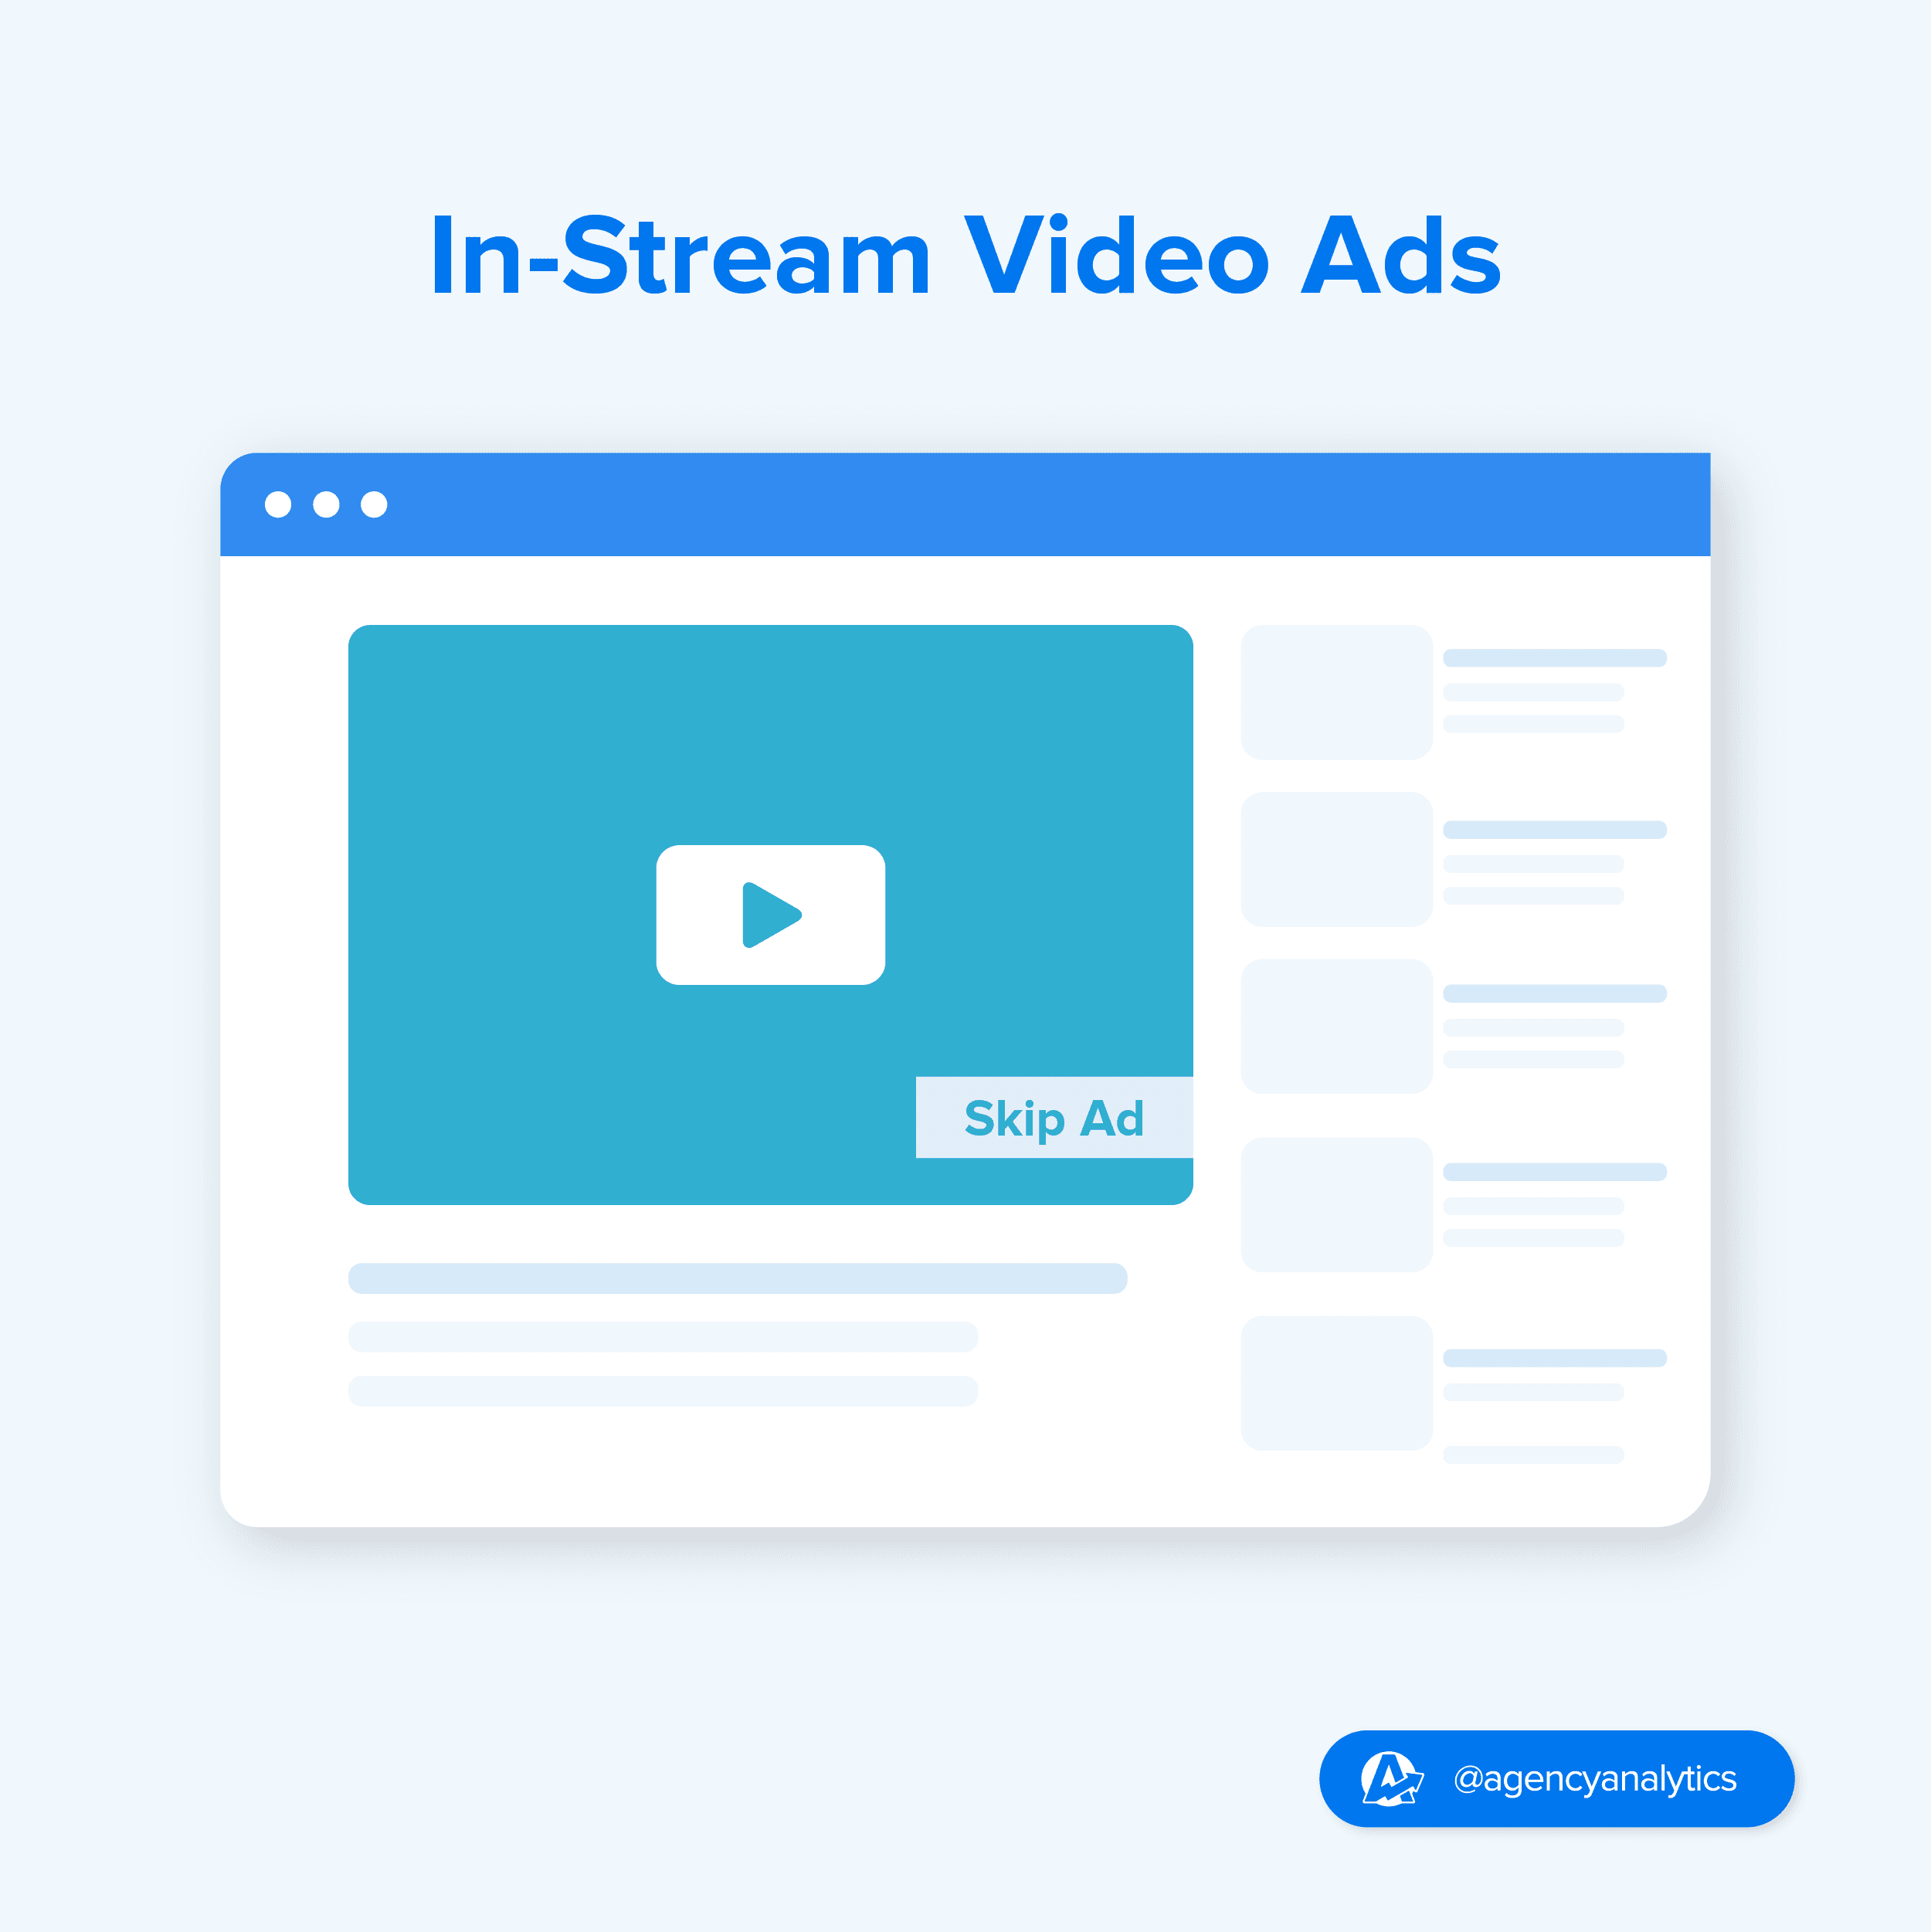 Illustration of In-Stream Video Ads